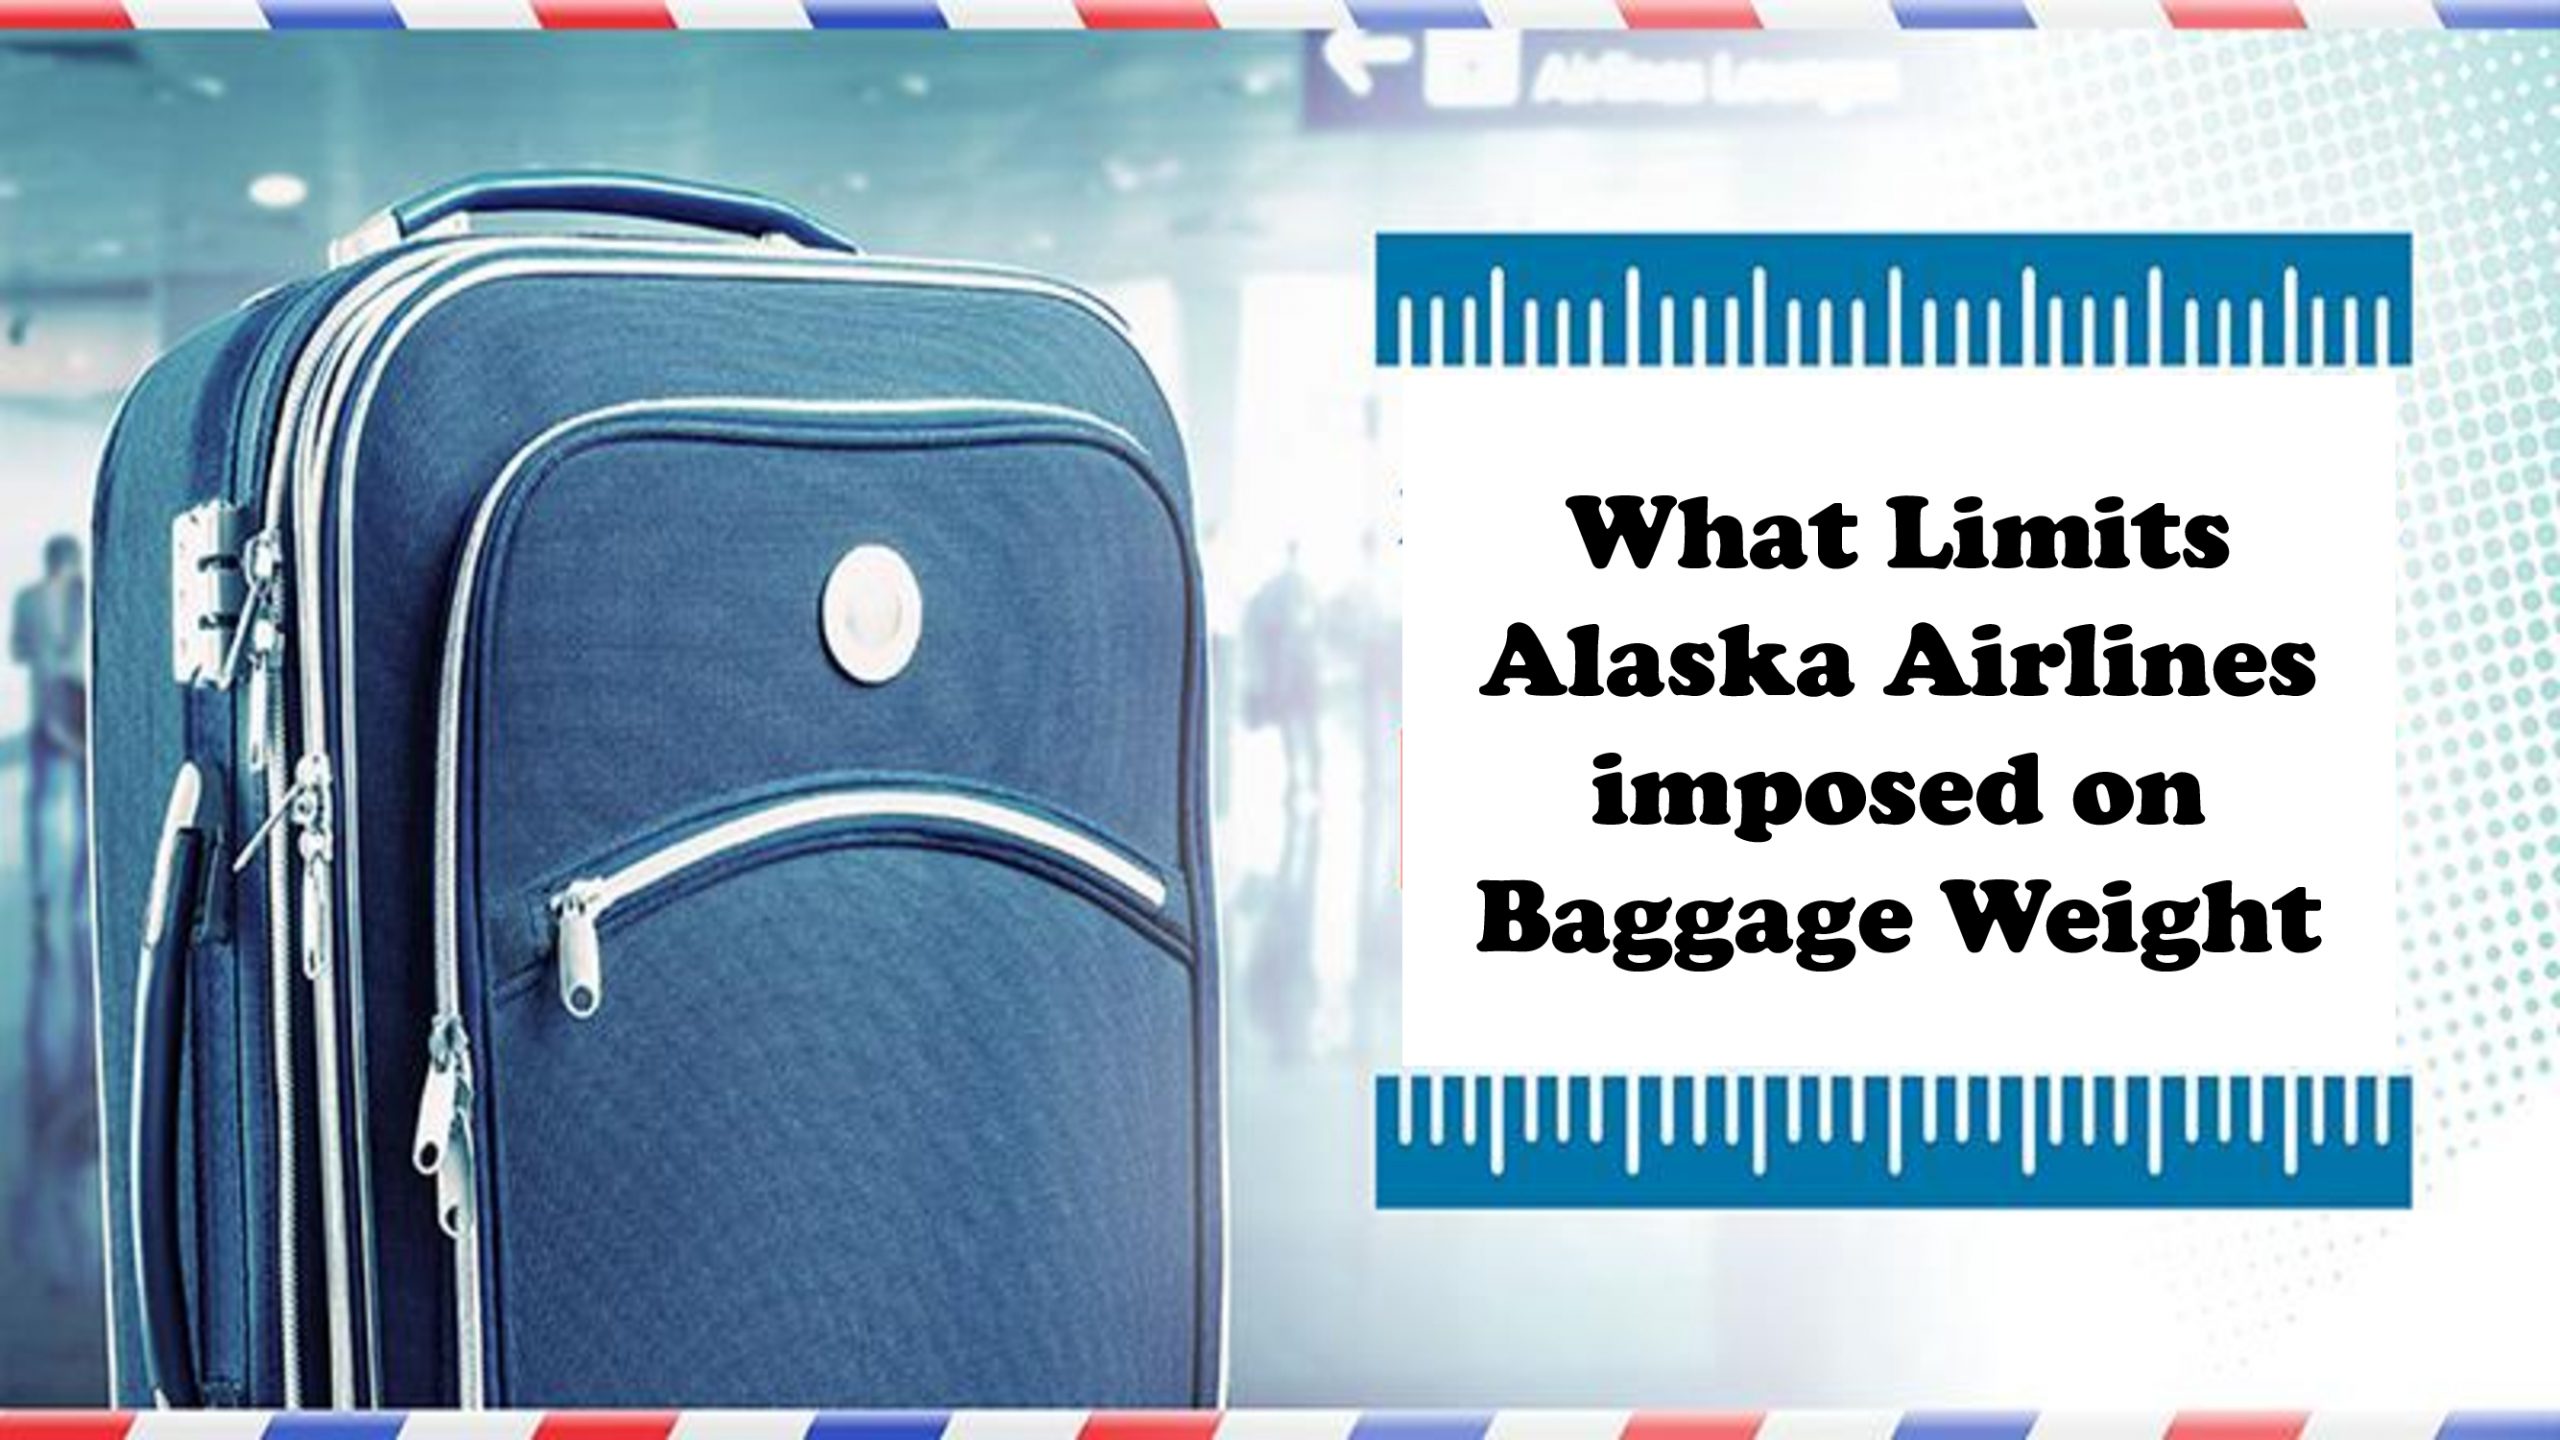 What limits Alaska Airlines imposed on baggage weight?